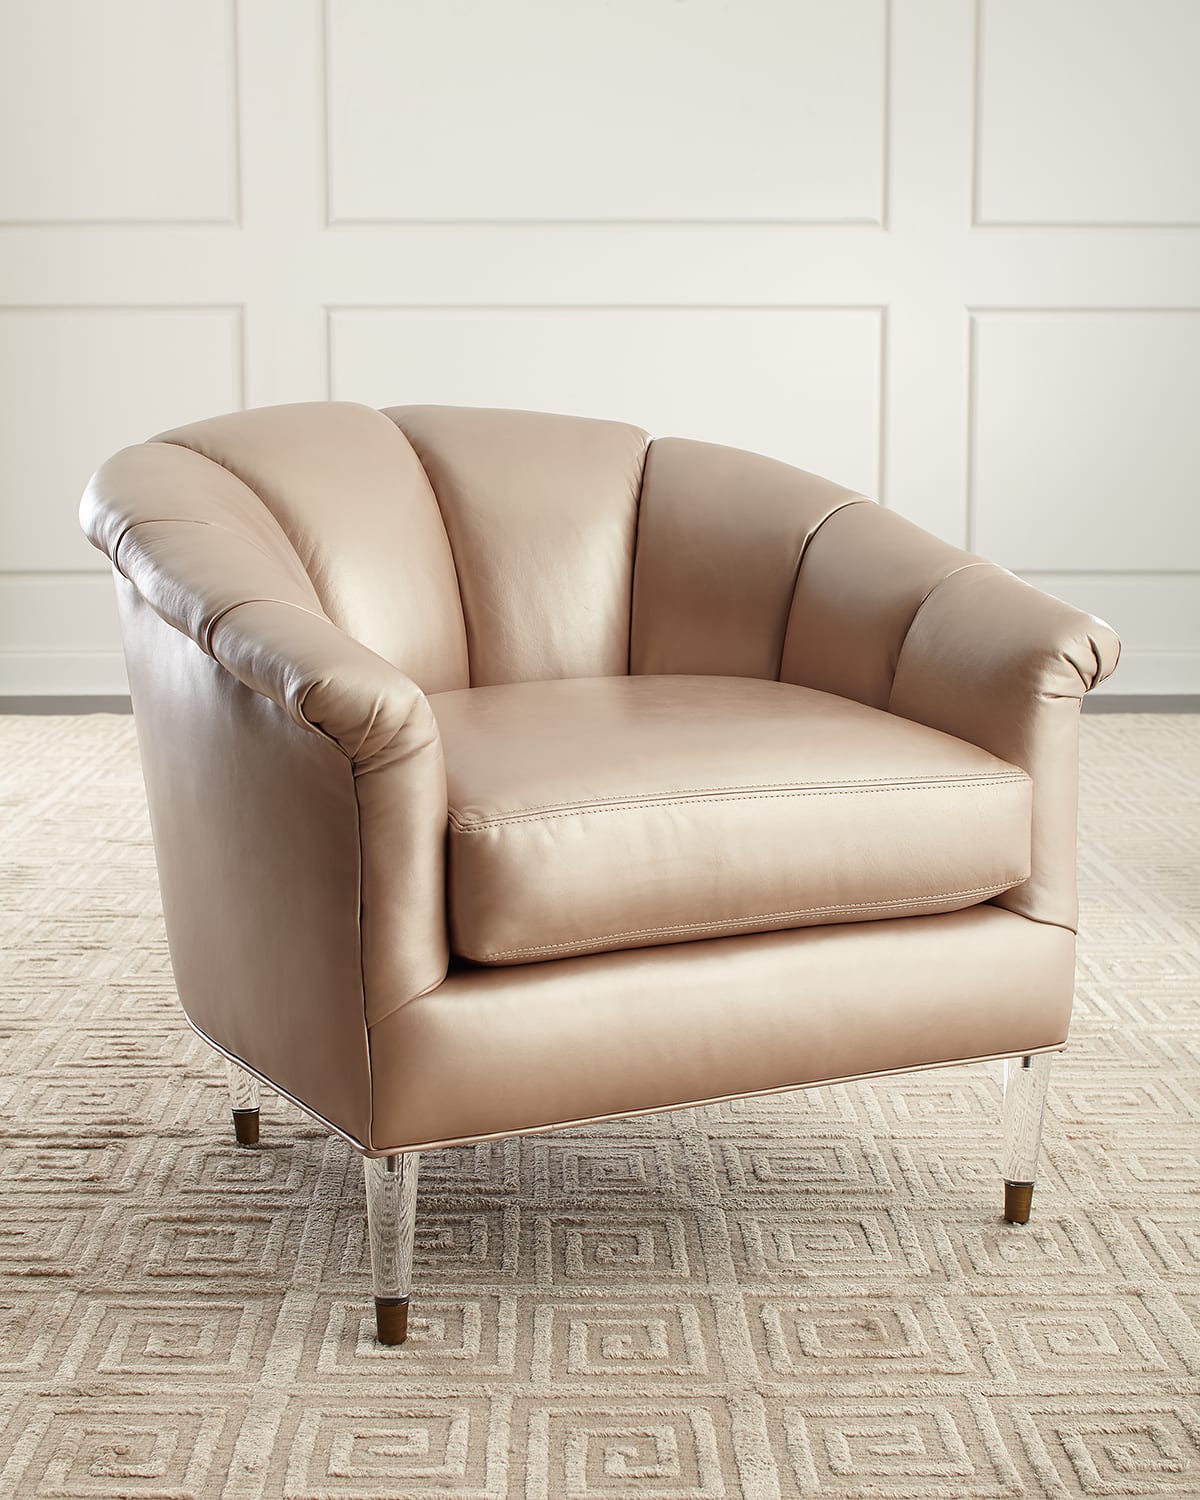 Massoud Surrey Leather Channel Tufted Chair